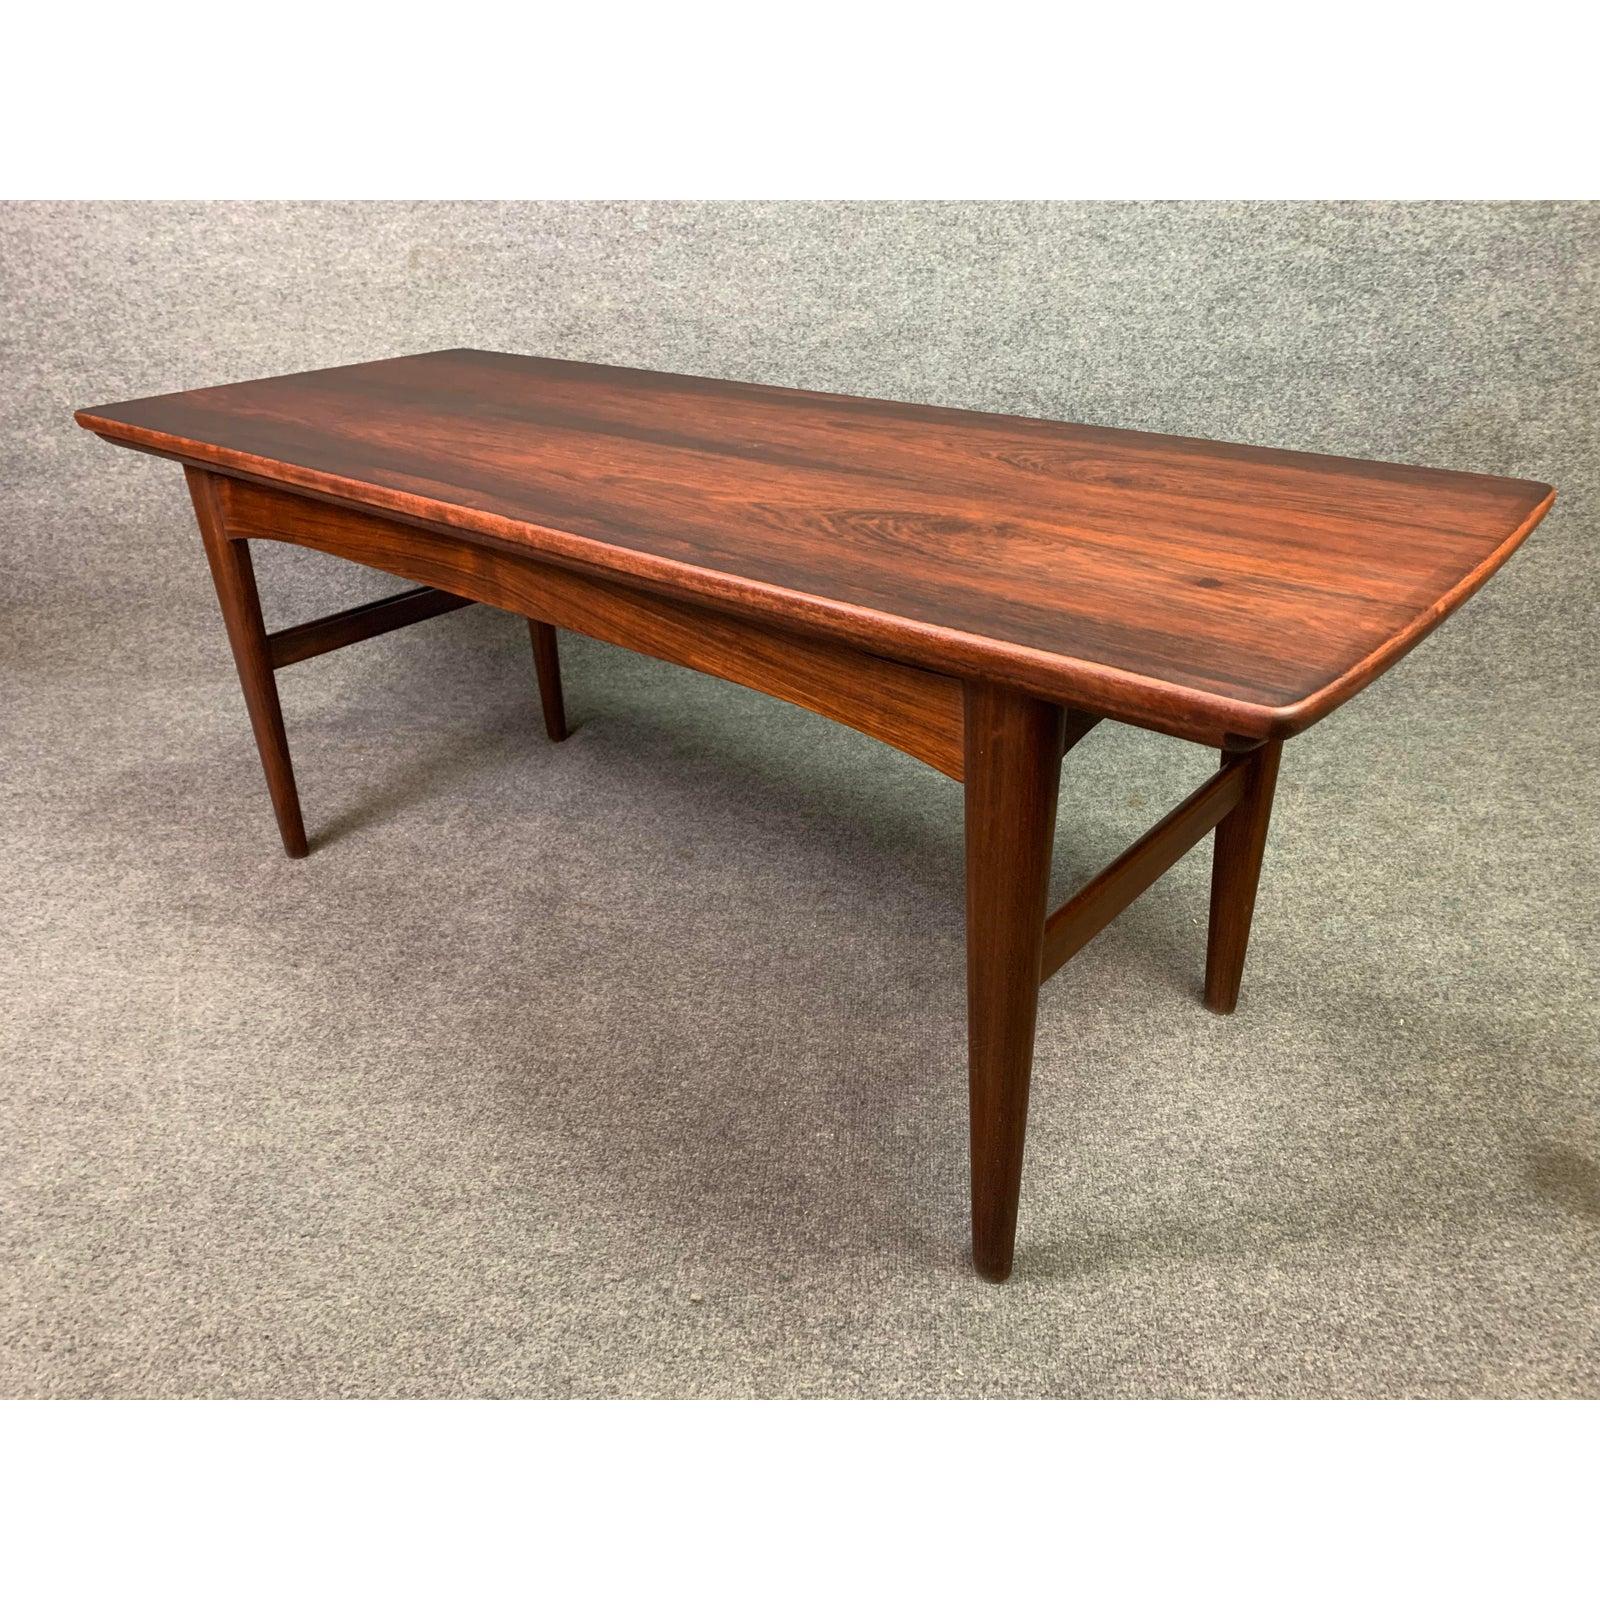 RESERVED FOR NOA: Vintage Danish Mid-Century Modern Rosewood Elevator Table 3